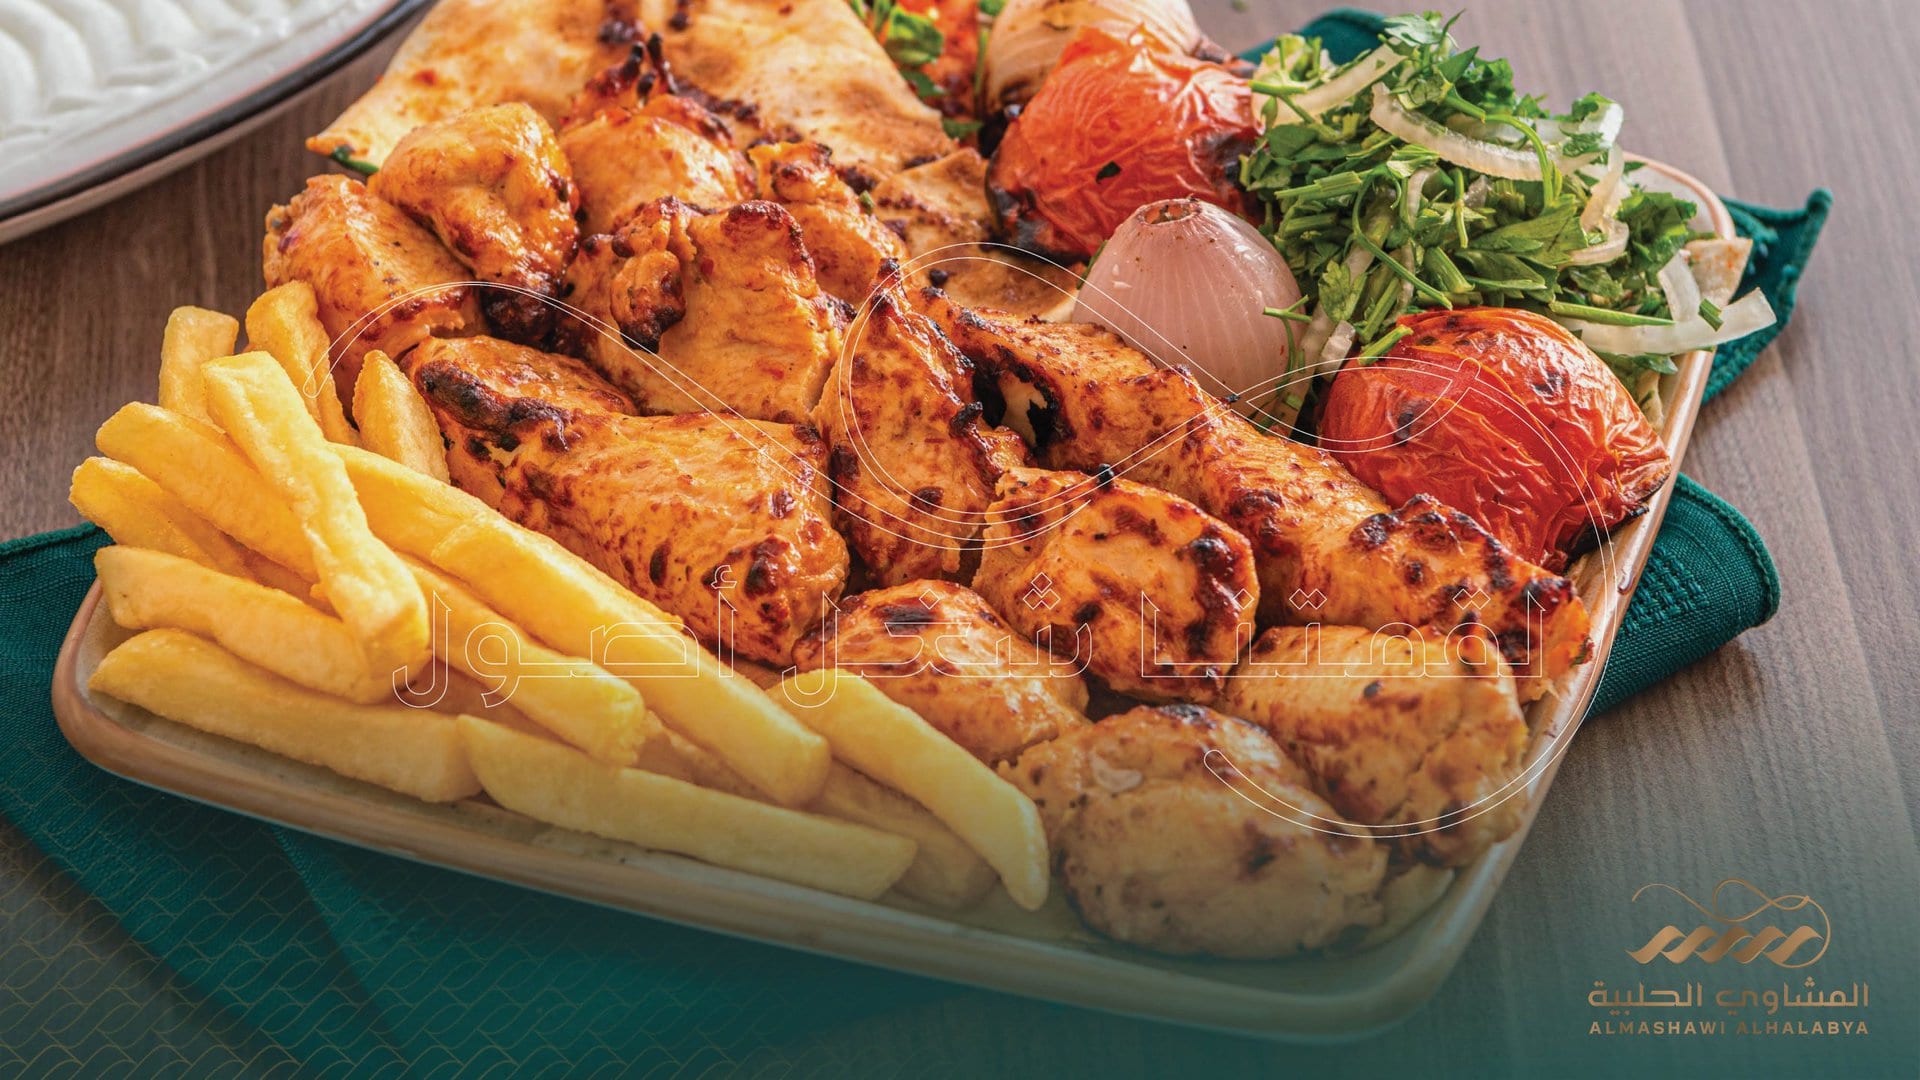 Fire Up Your Taste Buds with Our Legendary Barbeque: Get the Best Juiciest Grilled Chicken in Dubai